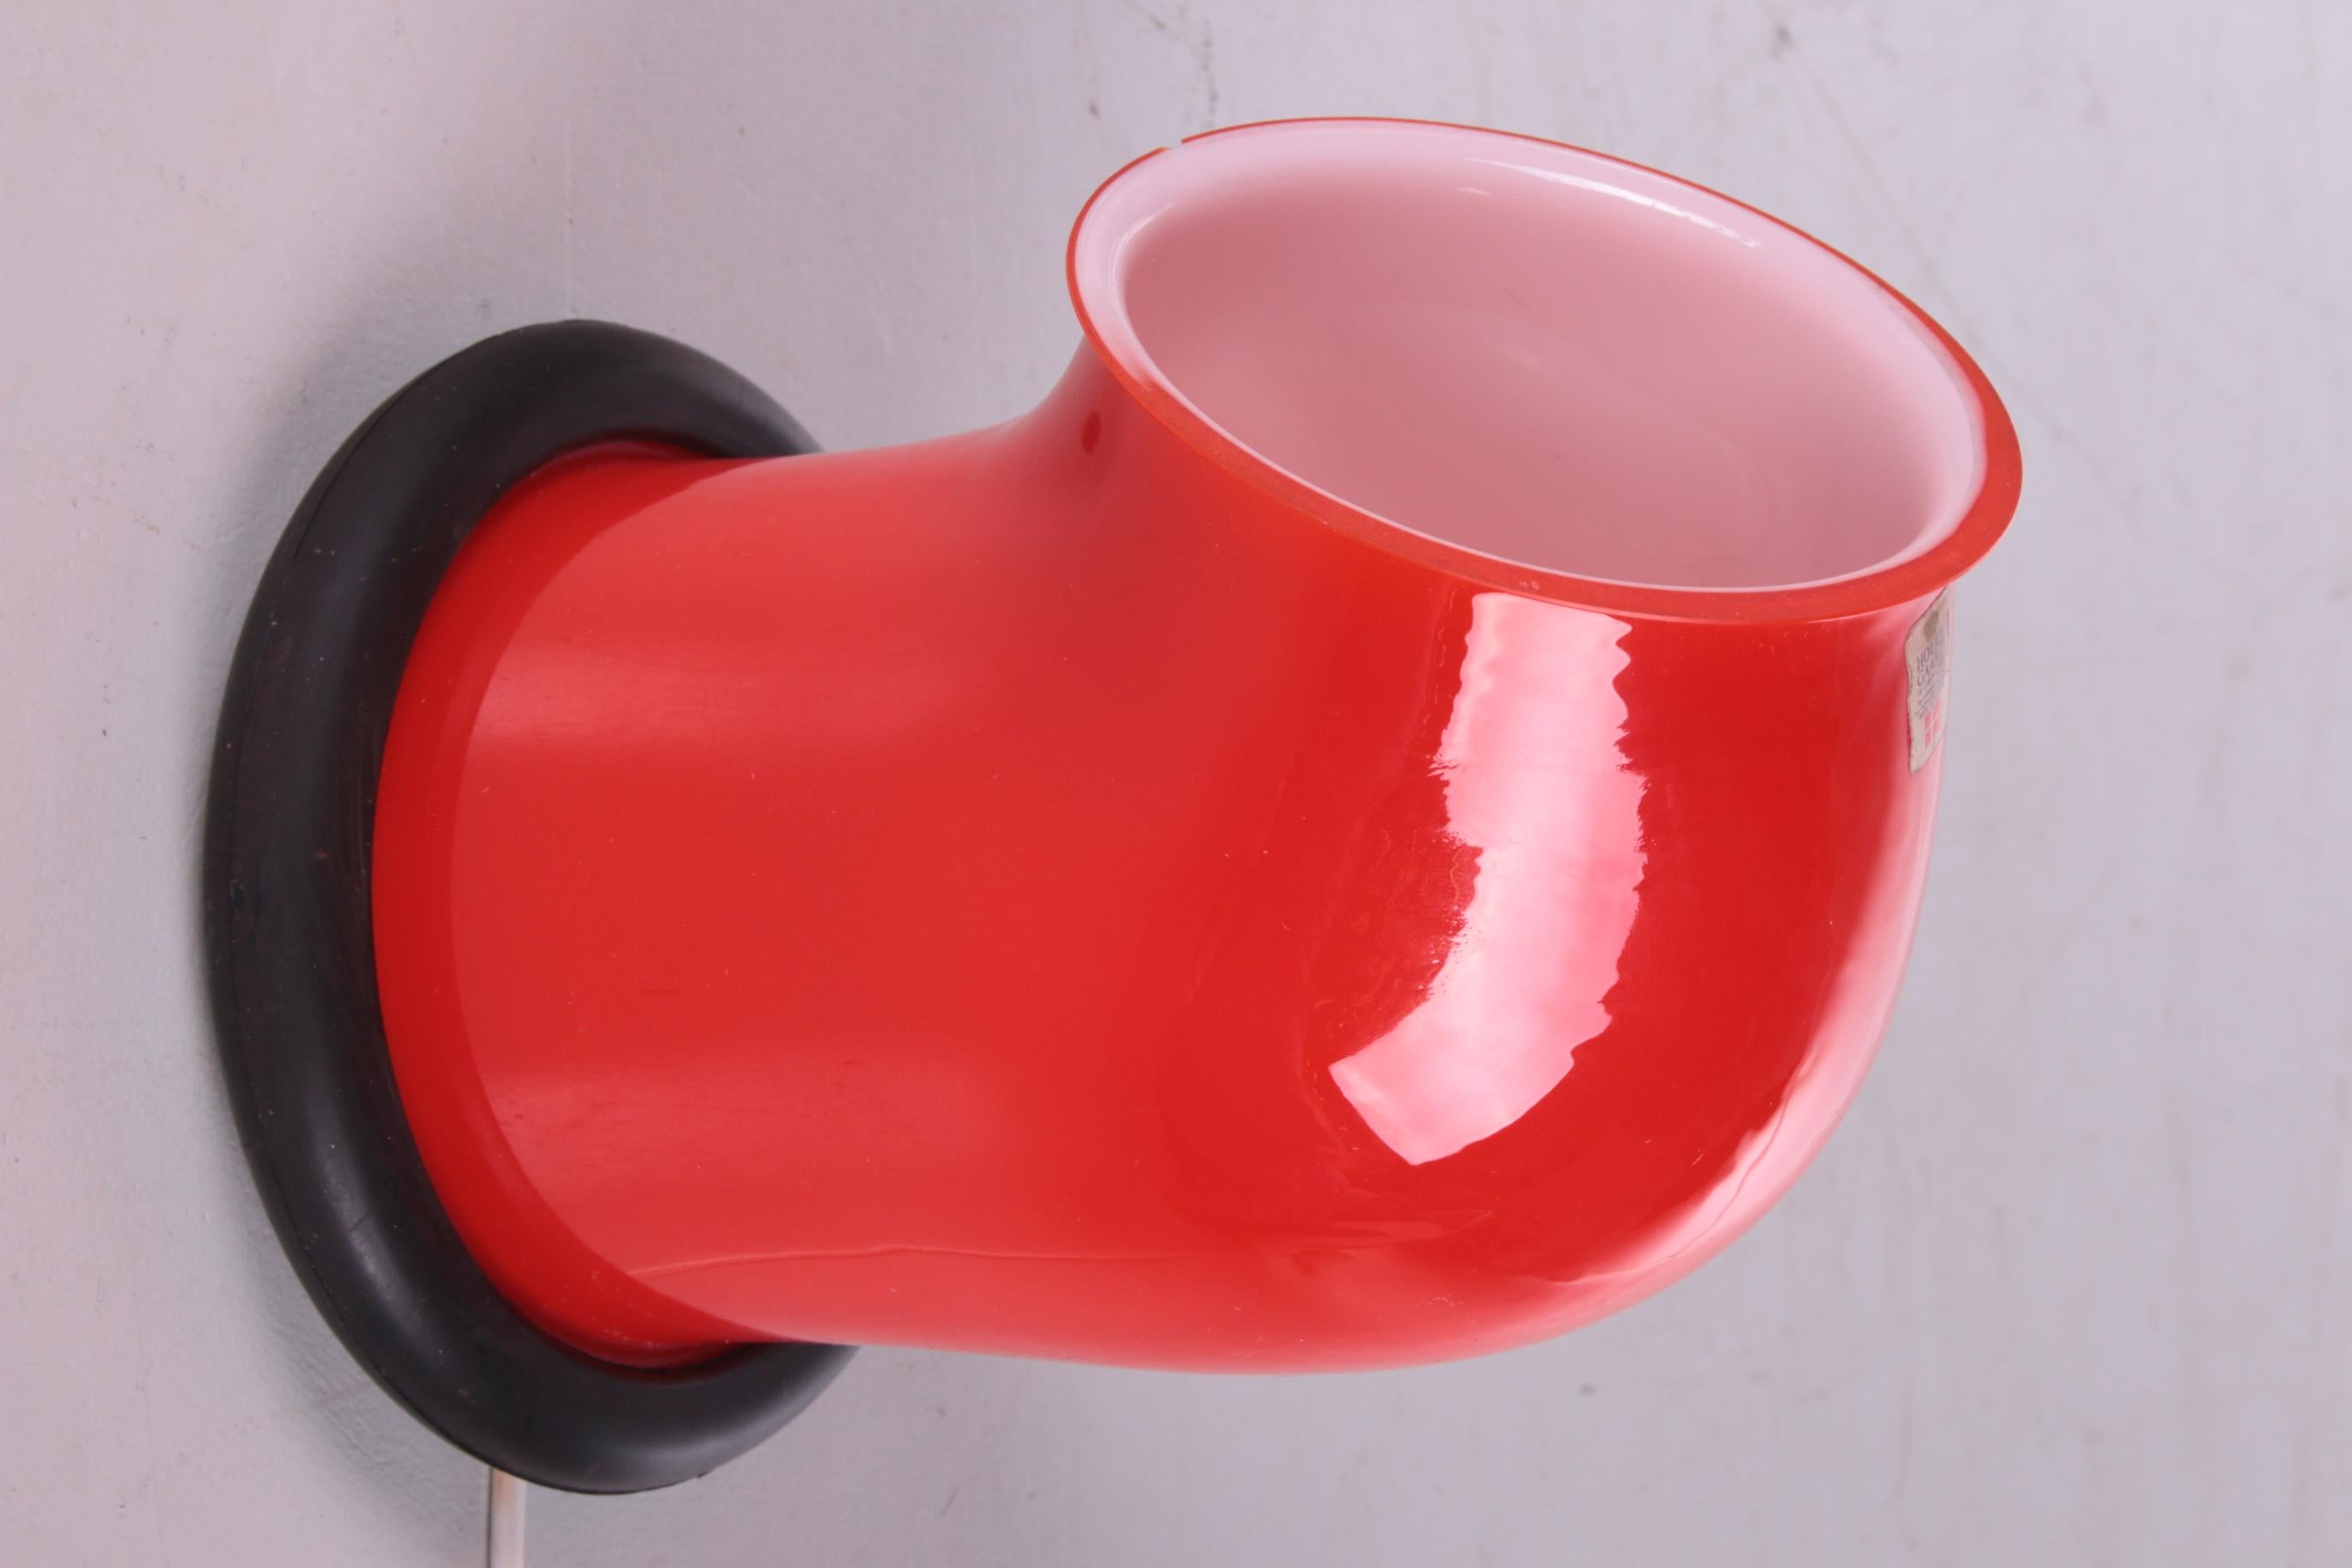 Vintage table lamp holmegaard by Michael Bang, 1972


A beautiful bright red Midcentury Holmegaard glass Epoke lamp.

Designed by Michael Bang for Holmegaard, Denmark, 1972.

Wonderfully playful design and slightly nautical in